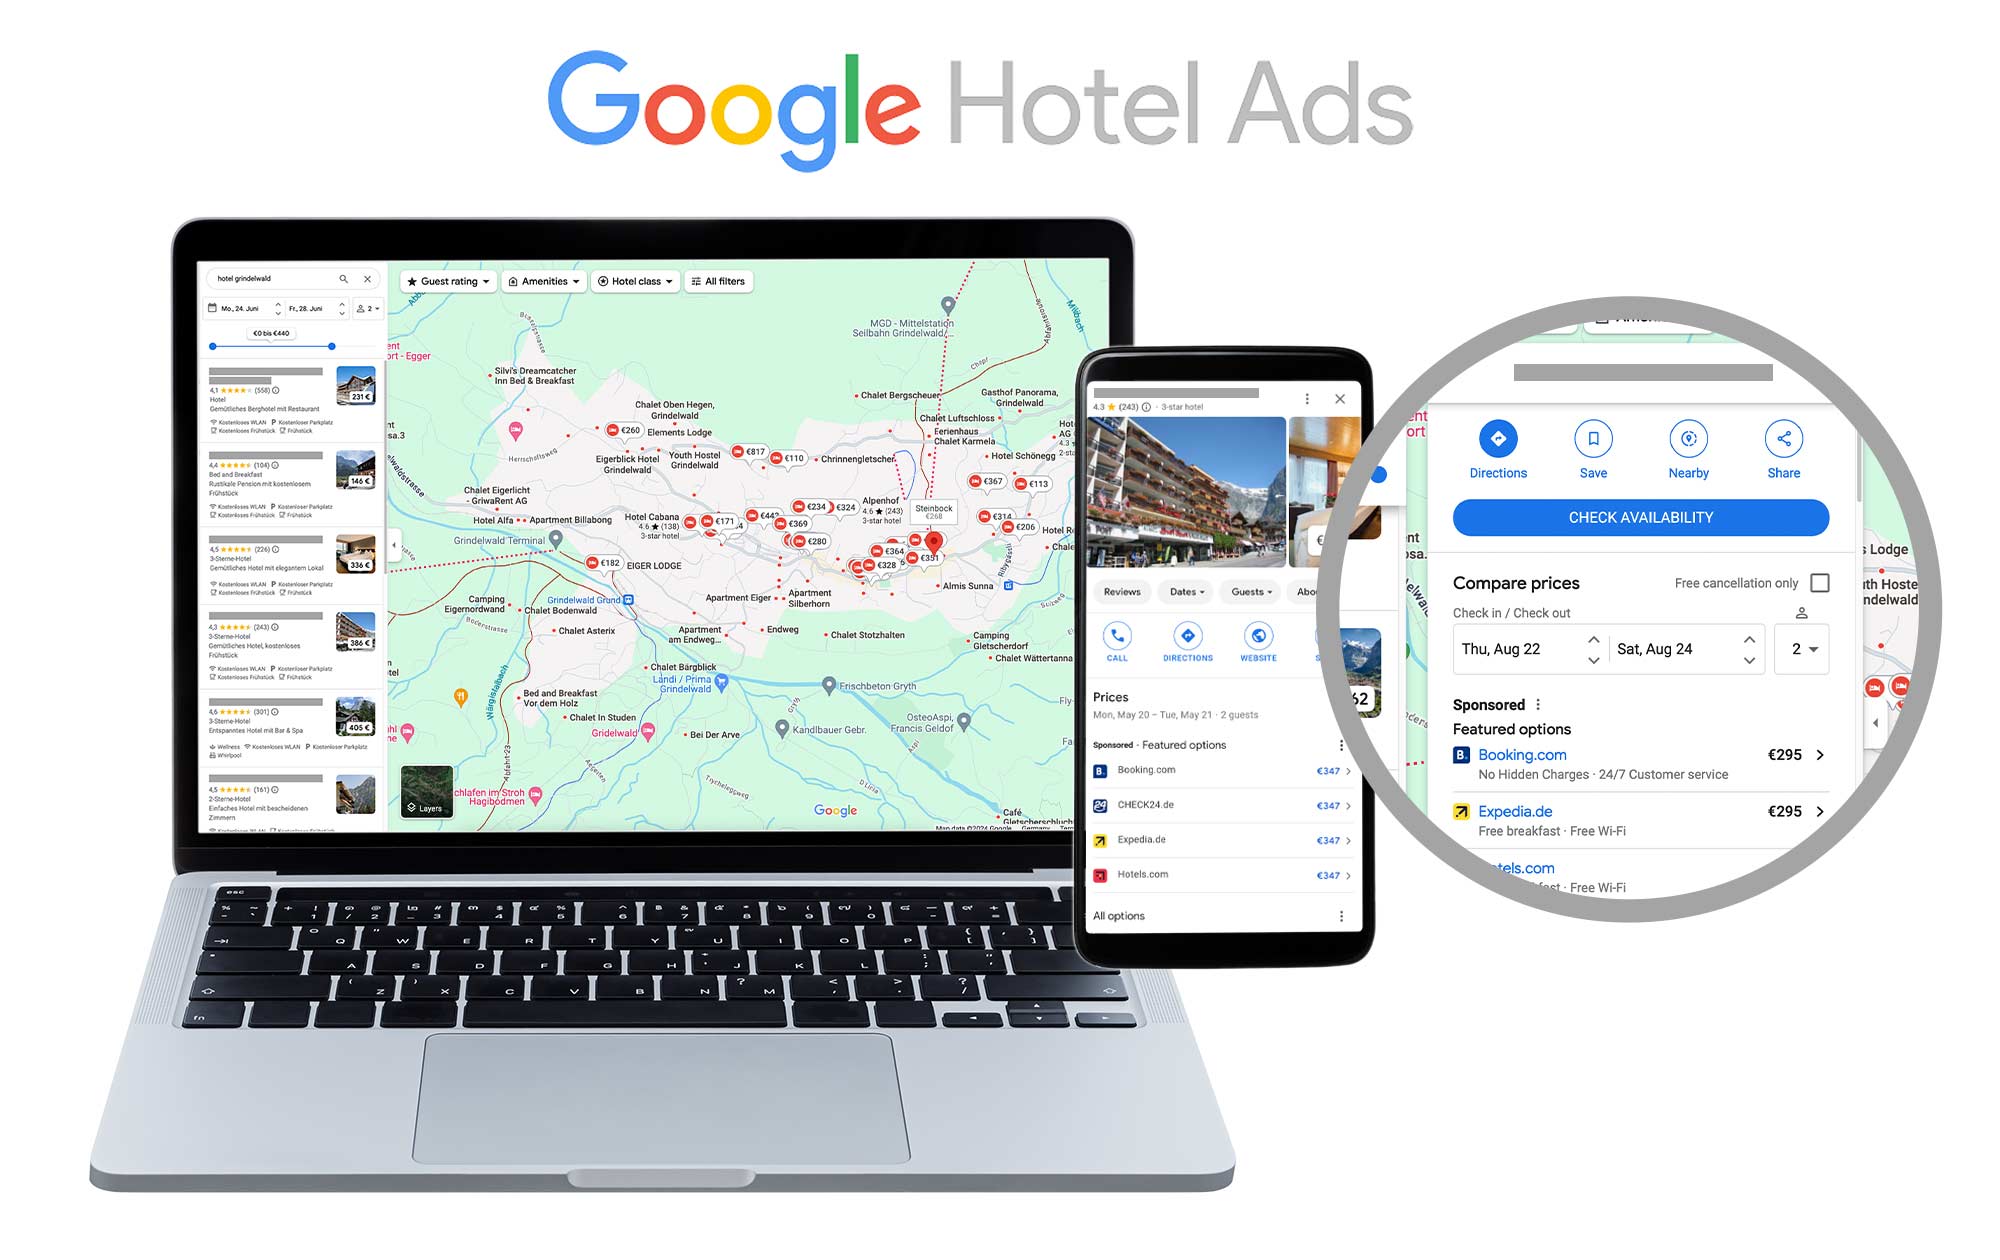 Where do hotels appear in Google searches?